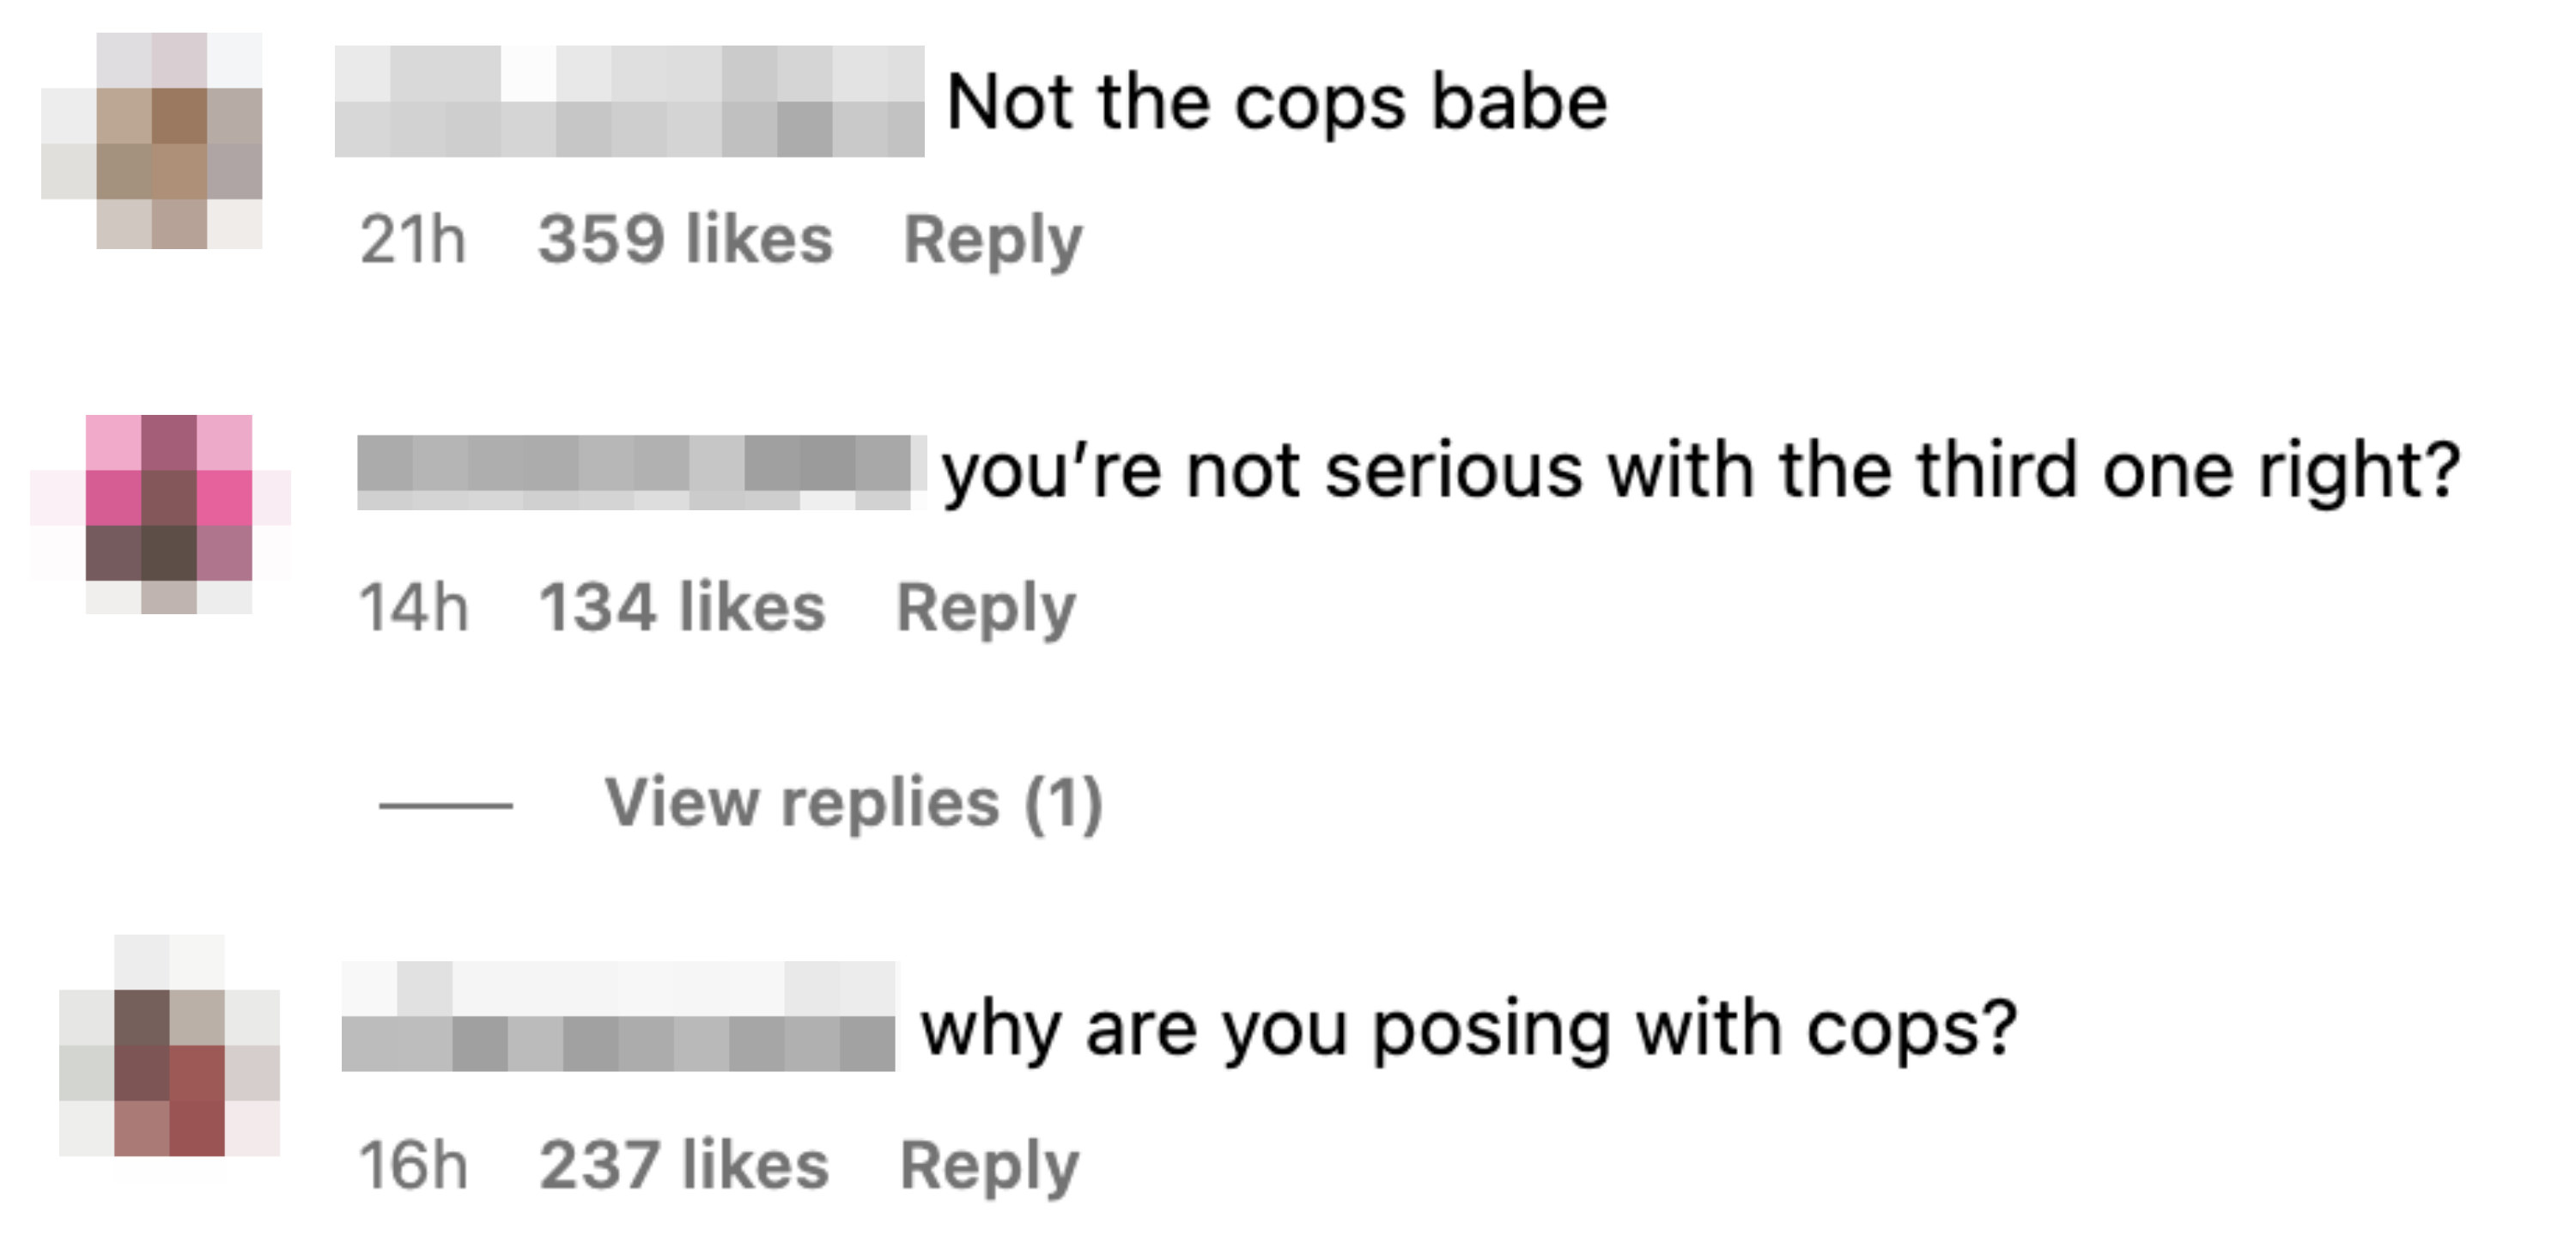 Some comments include, &quot;Not the cops babe,&quot; &quot;you&#x27;re not serious with the third one right?&quot; and &quot;Why are you posing with cops?&quot;